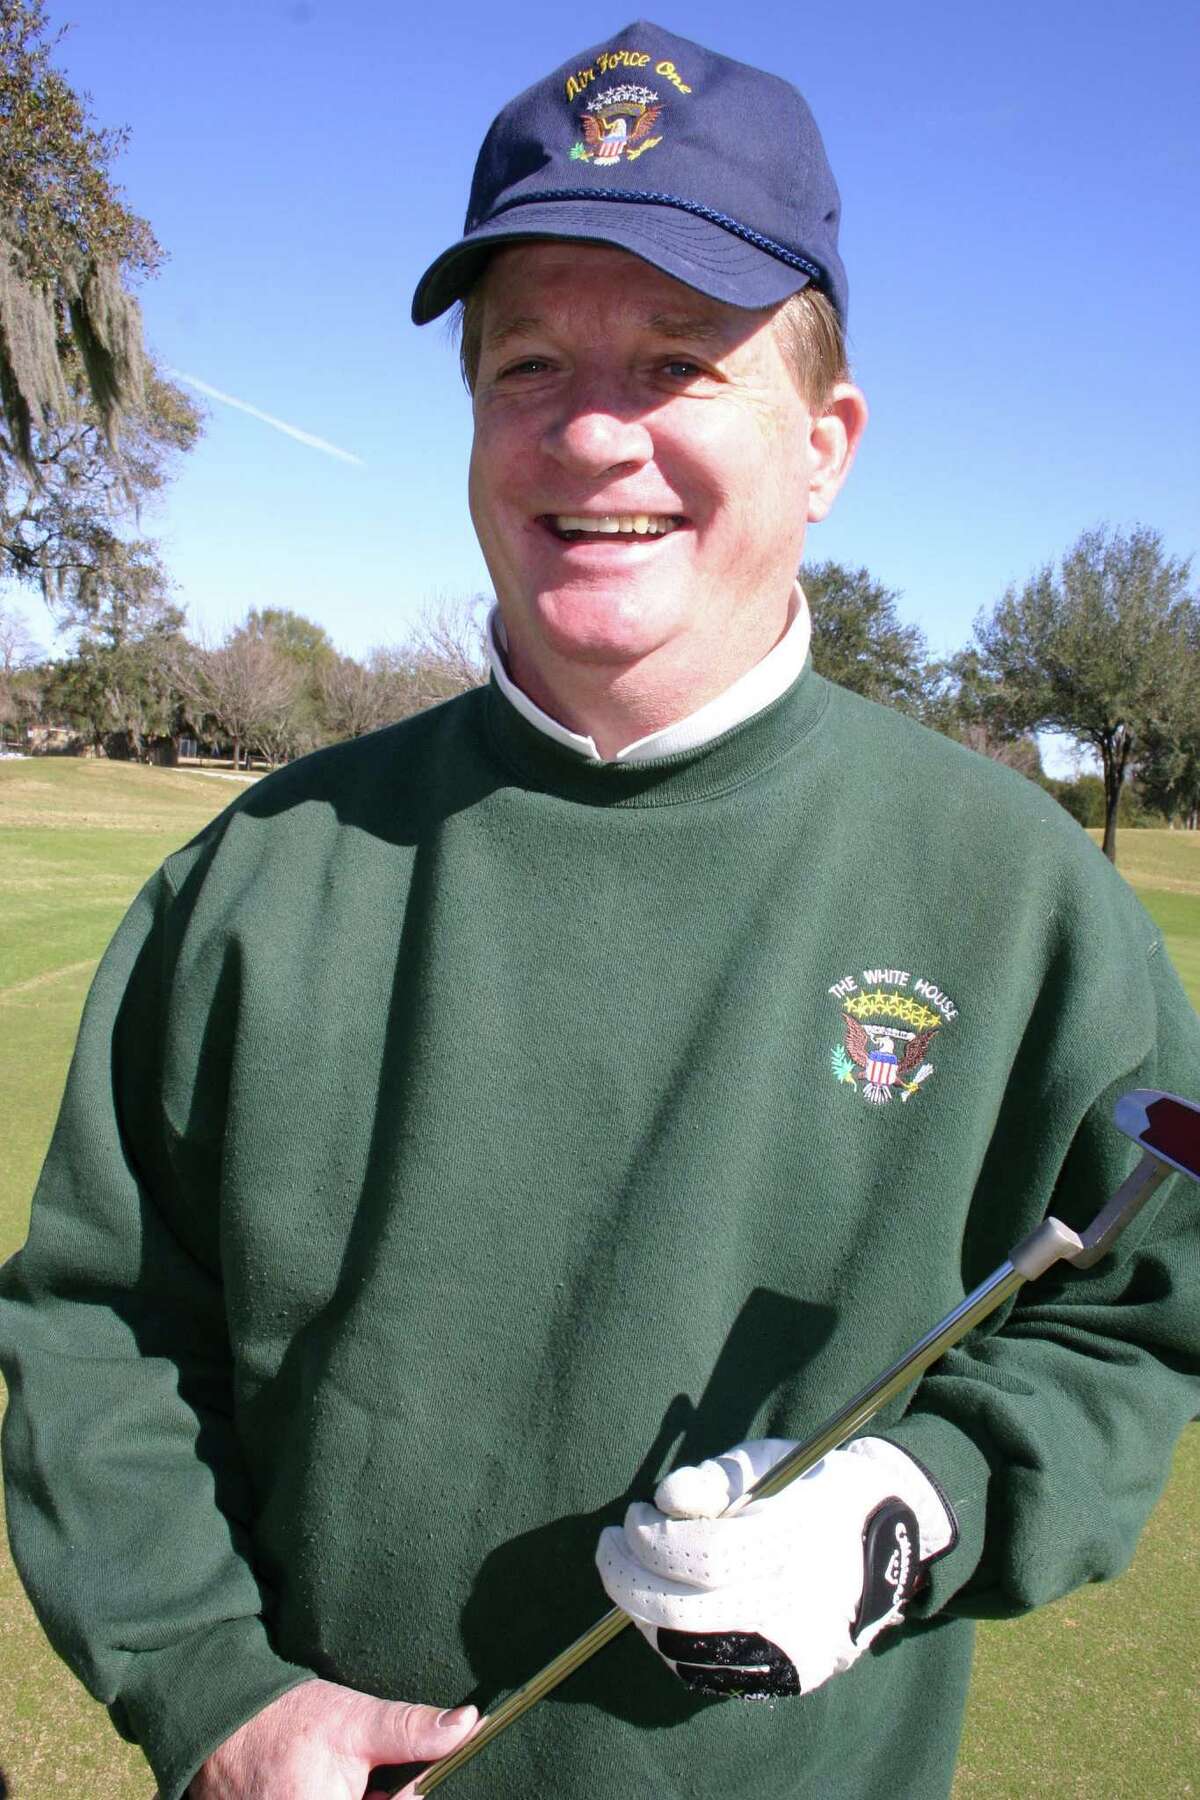 Peter Roussel, former press secretary to Presidents Reagan and Ford, enjoys a round of golf at BraeBurn Country Club.